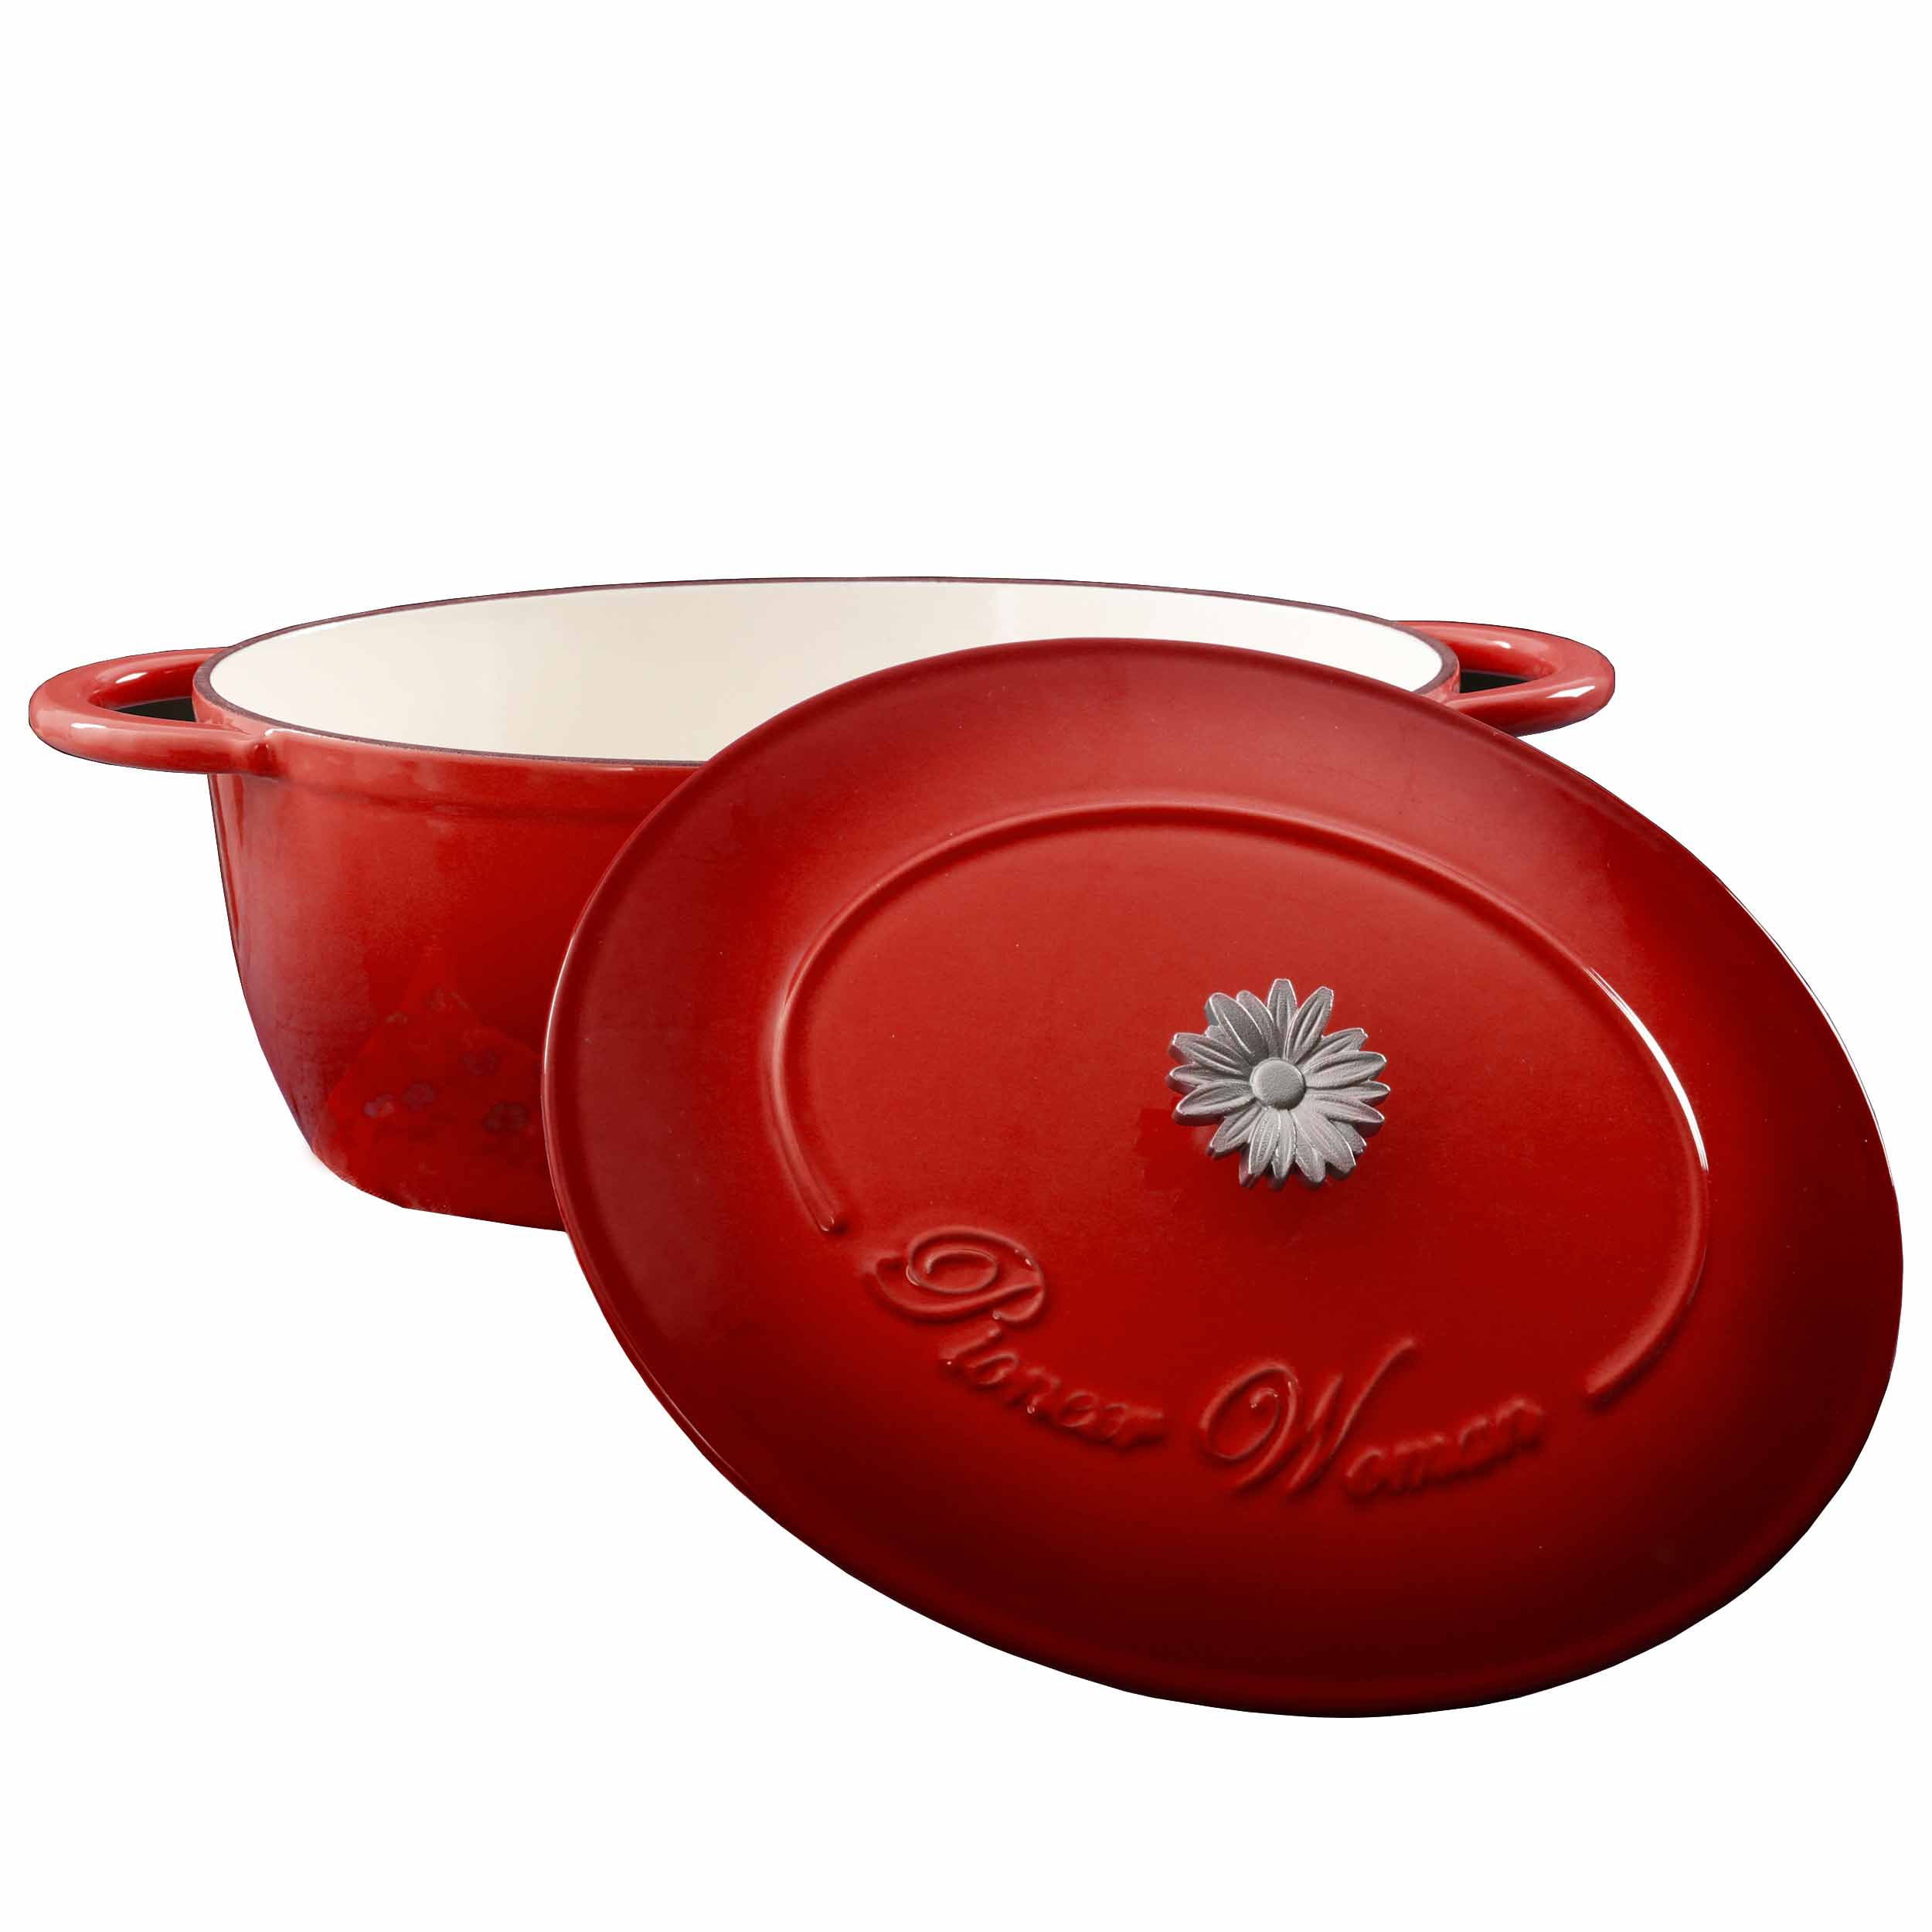 Pioneer Woman Timeless Beauty 5-quart Dutch Oven Now Only $37.36